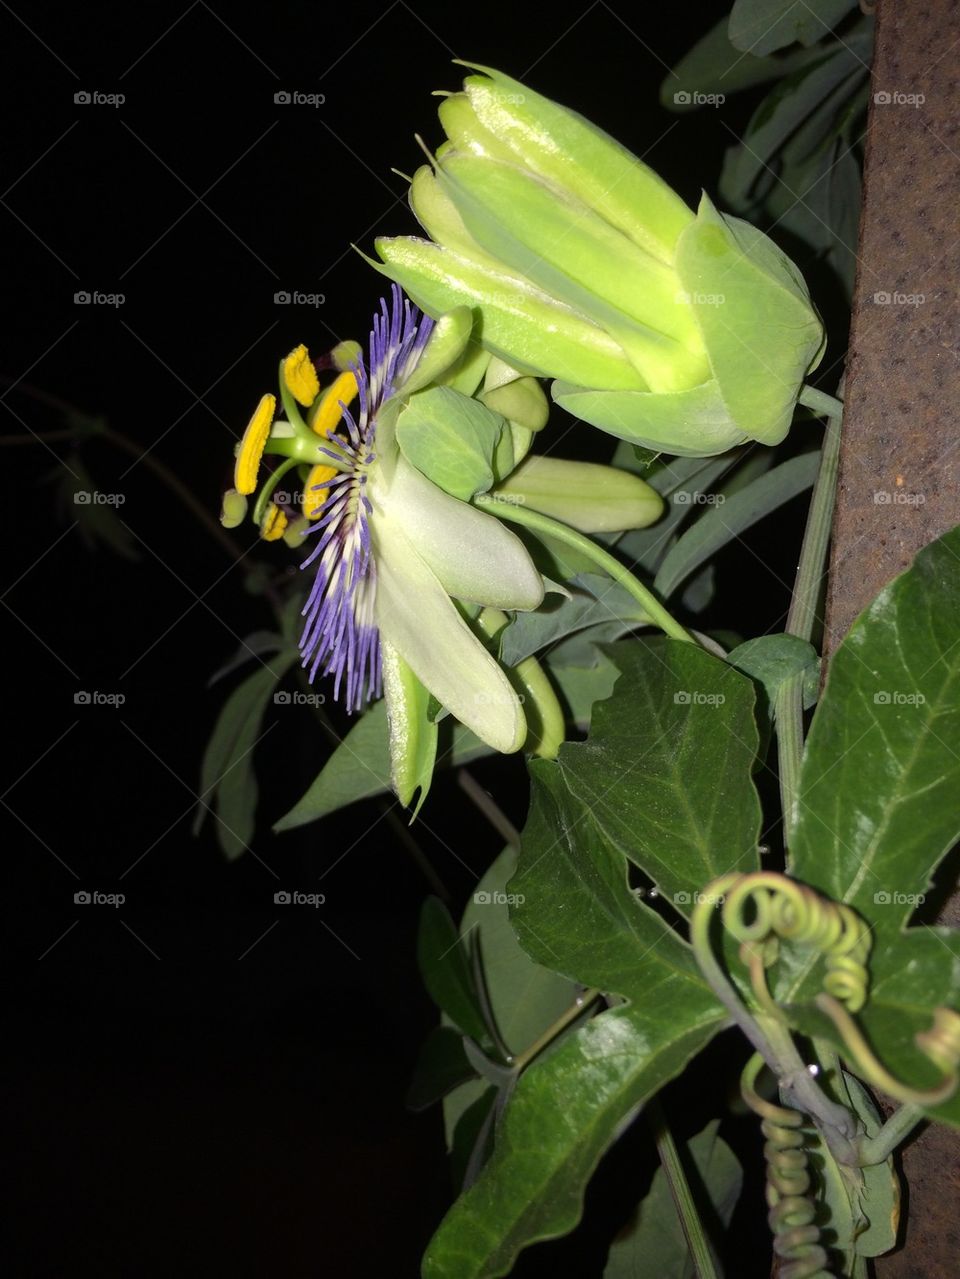 Passionflower at night